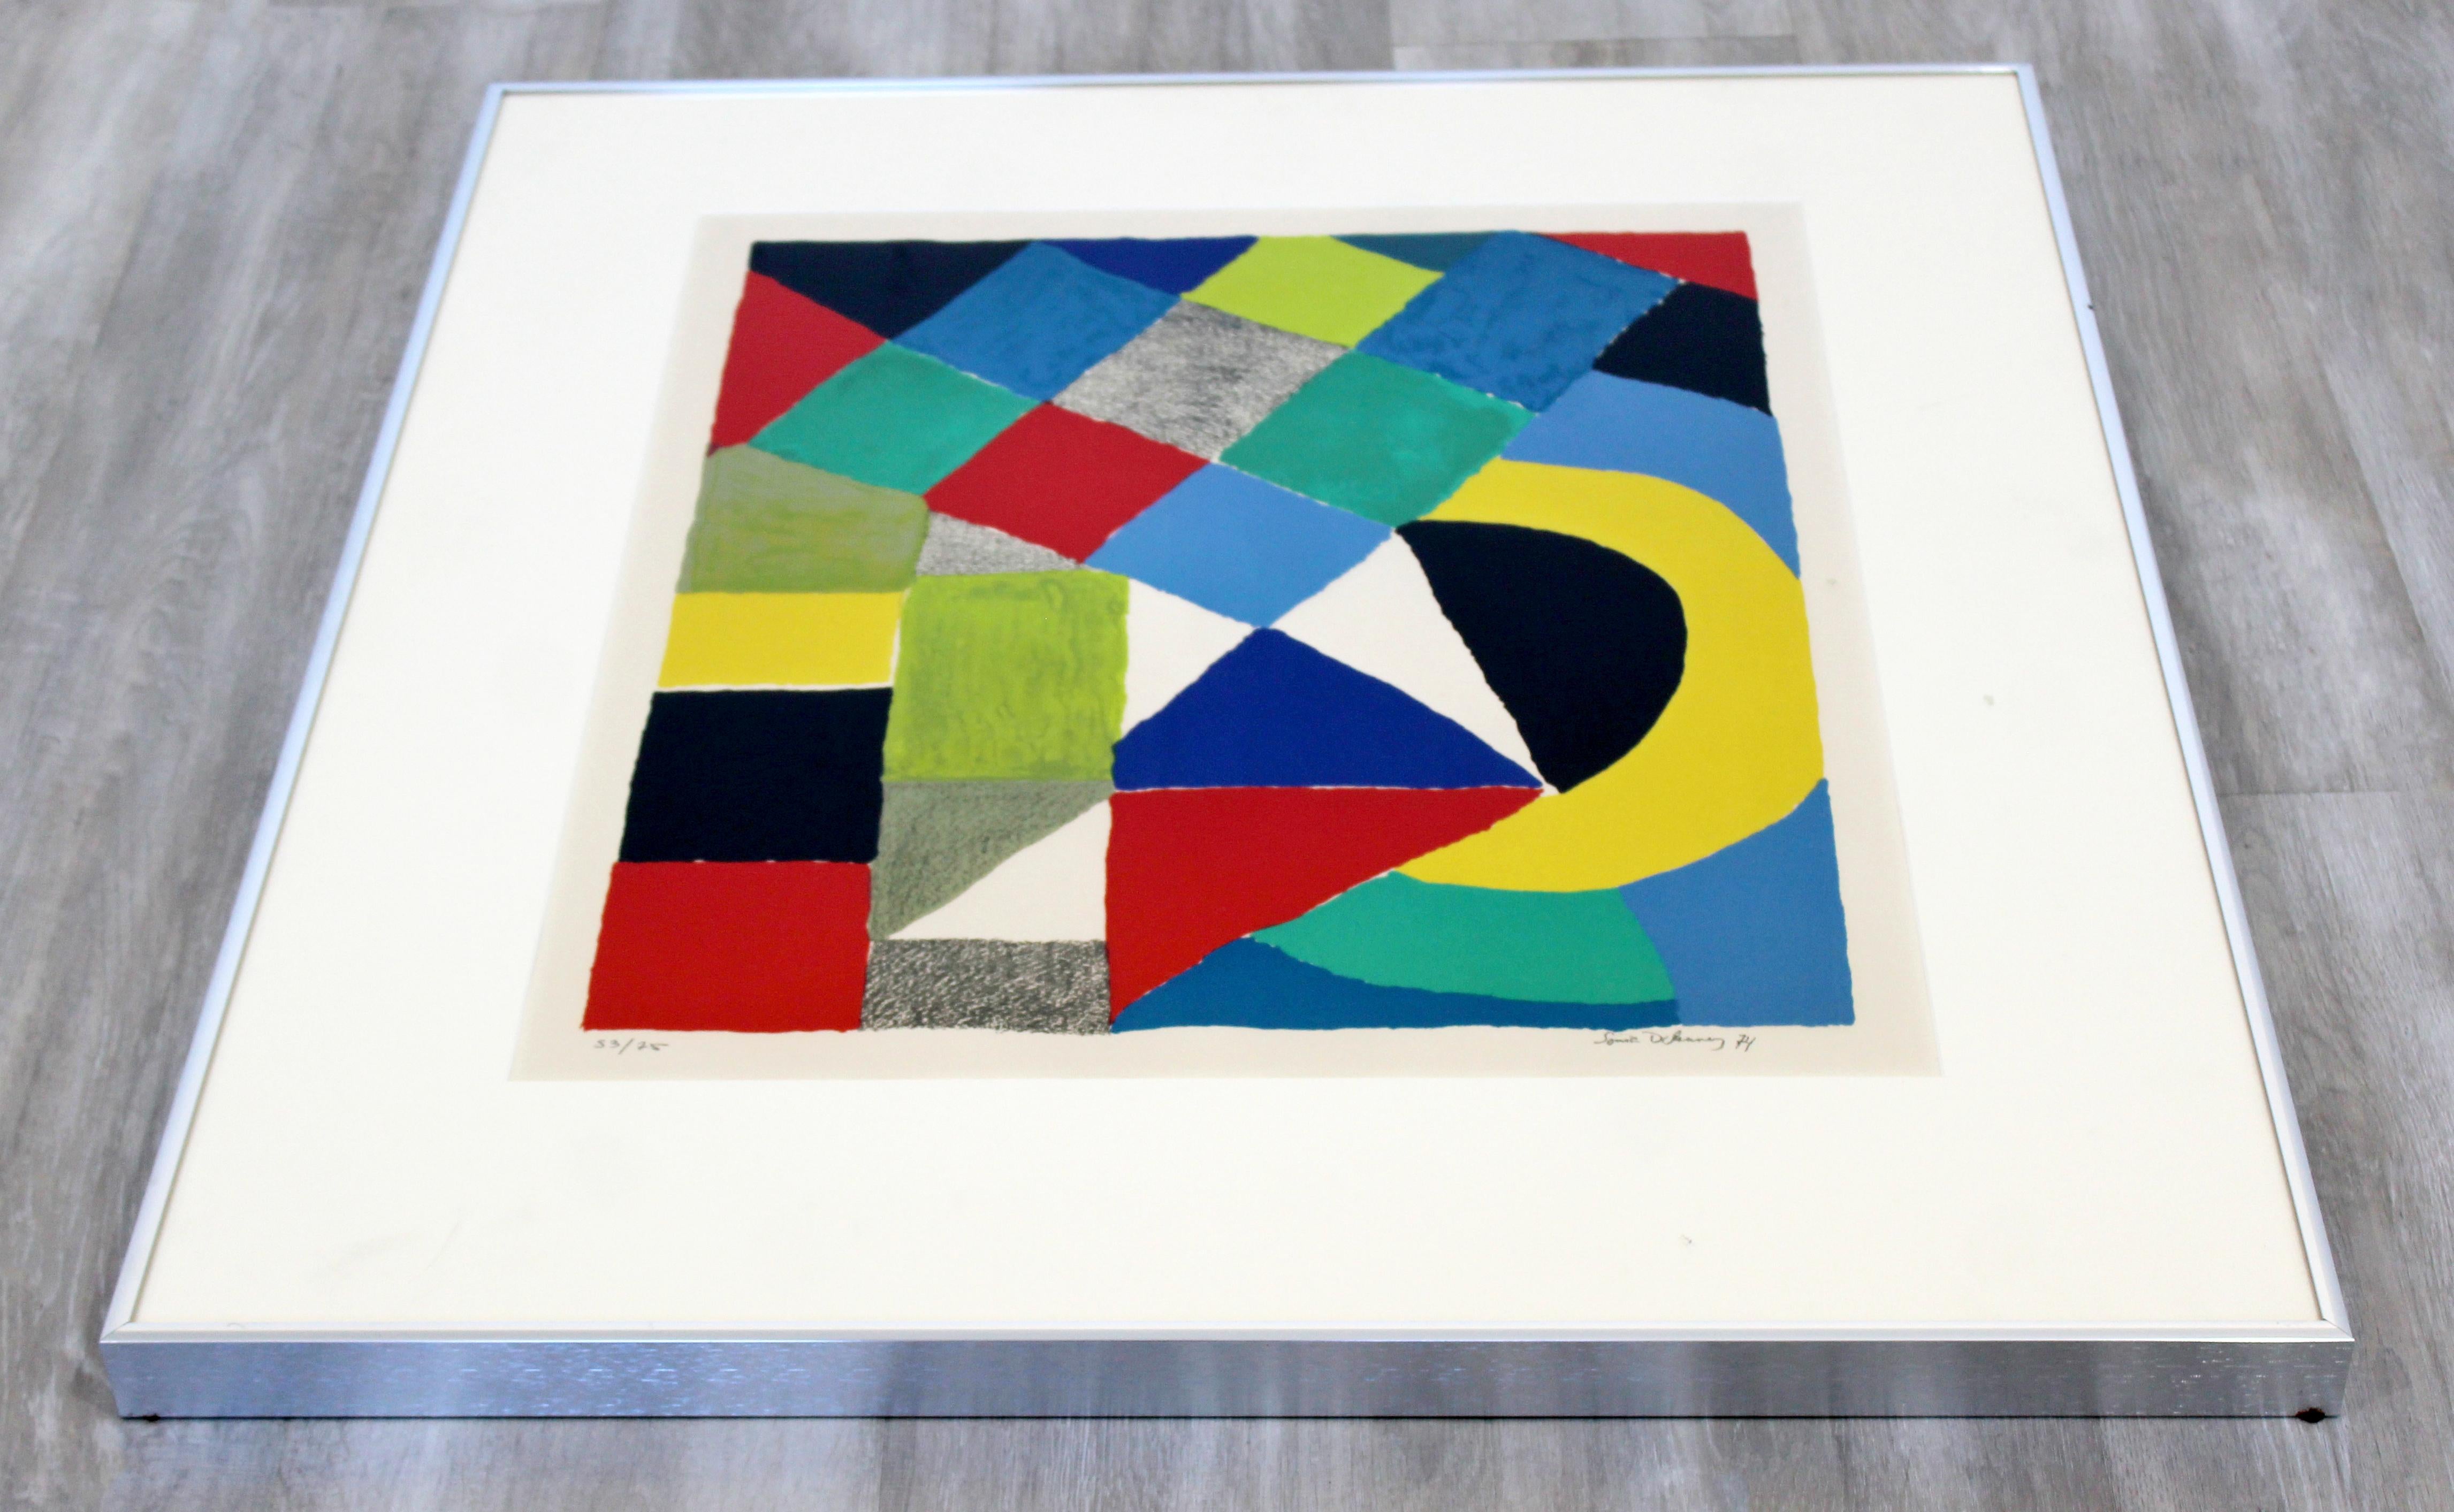 Late 20th Century Mid-Century Modern Framed Lithograph Signed Sonia Delaunay Arlequin 53/75, 1970s